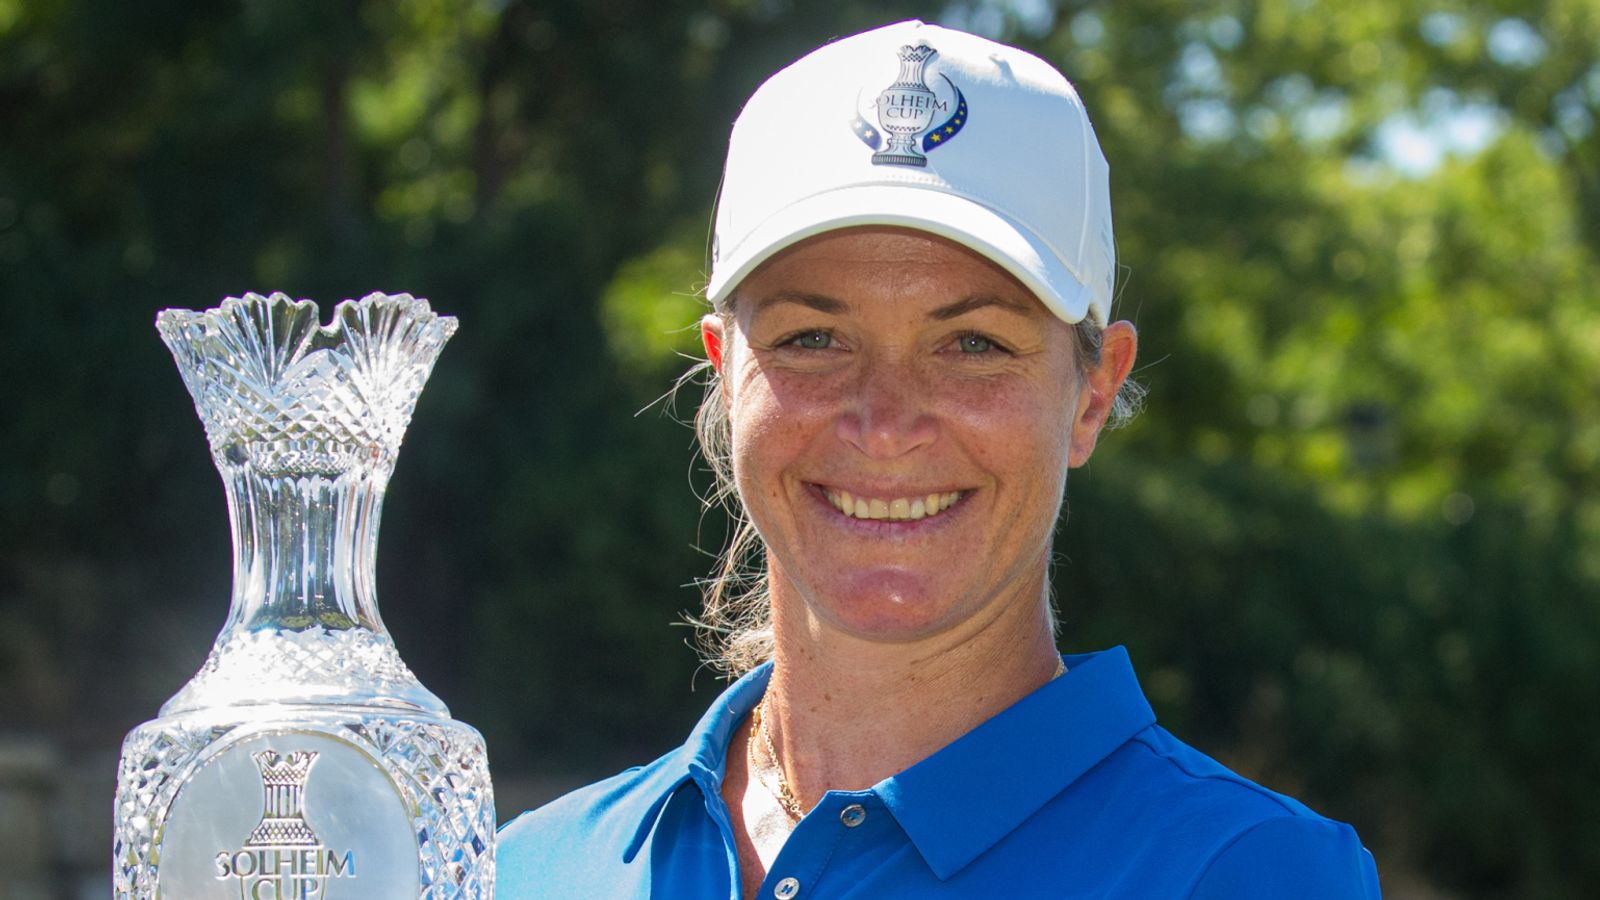 Solheim Cup: Suzann Pettersen on why 'crystal ball gets stronger' for historic Team Europe threepeat